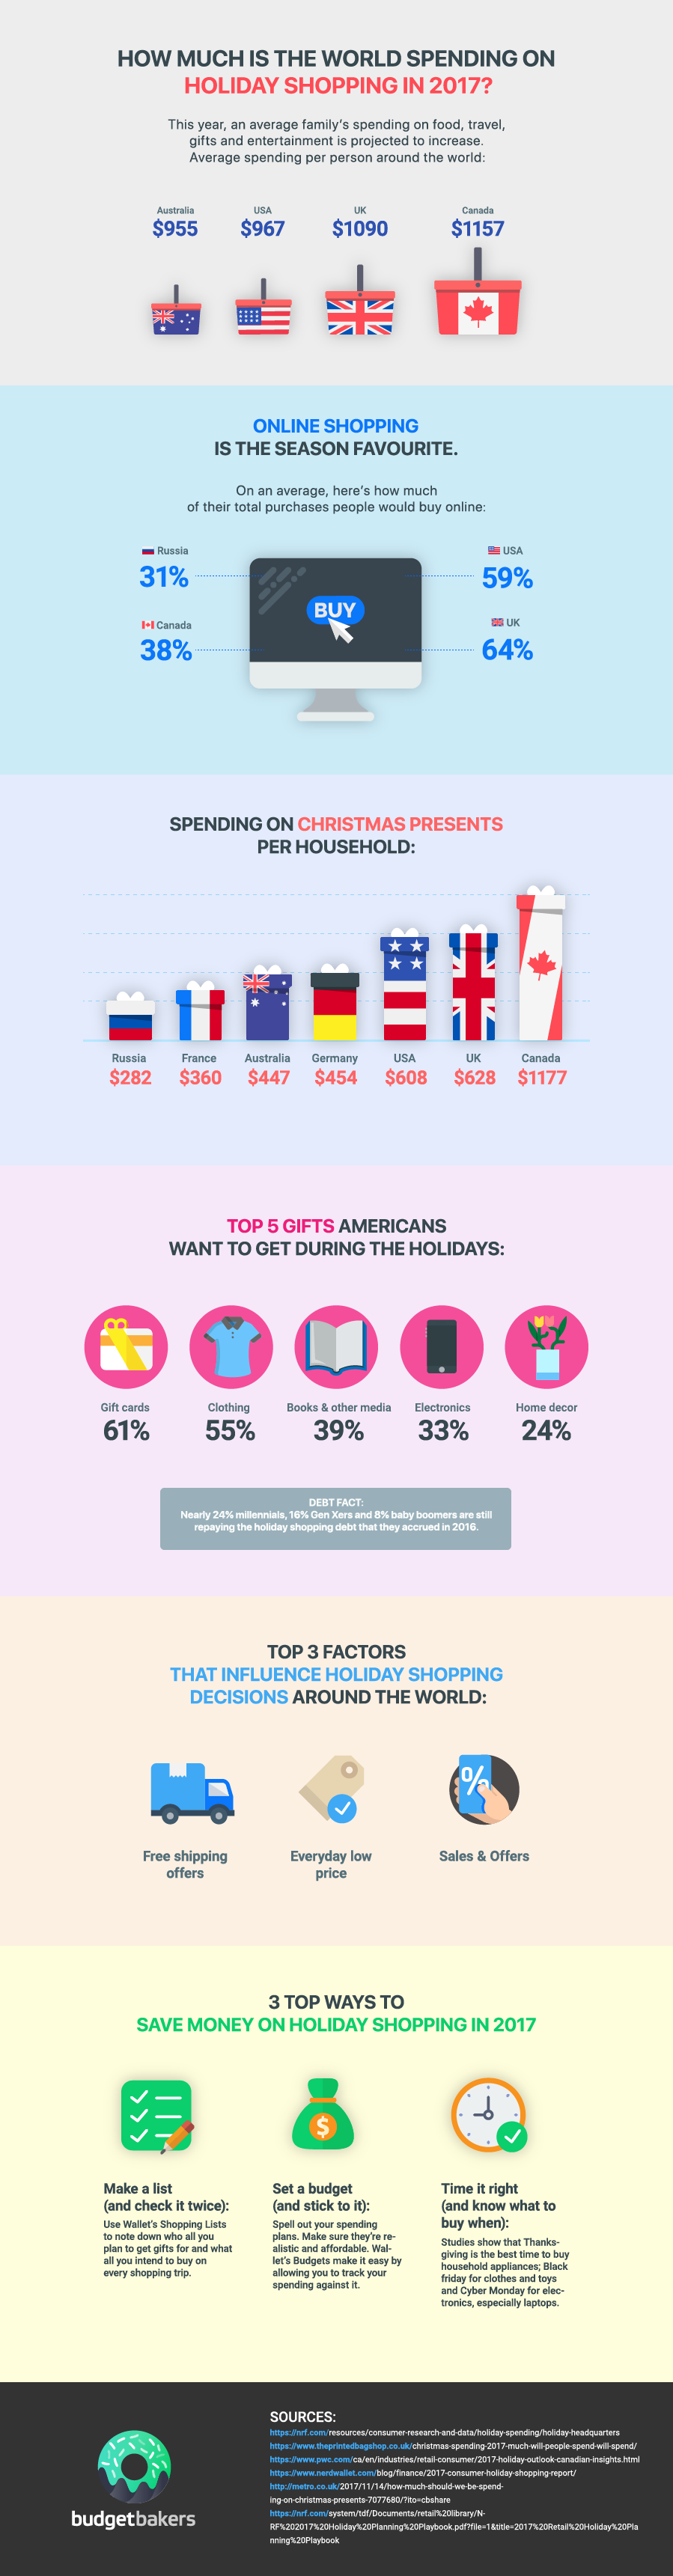 Holiday Shopping Infographic 2017